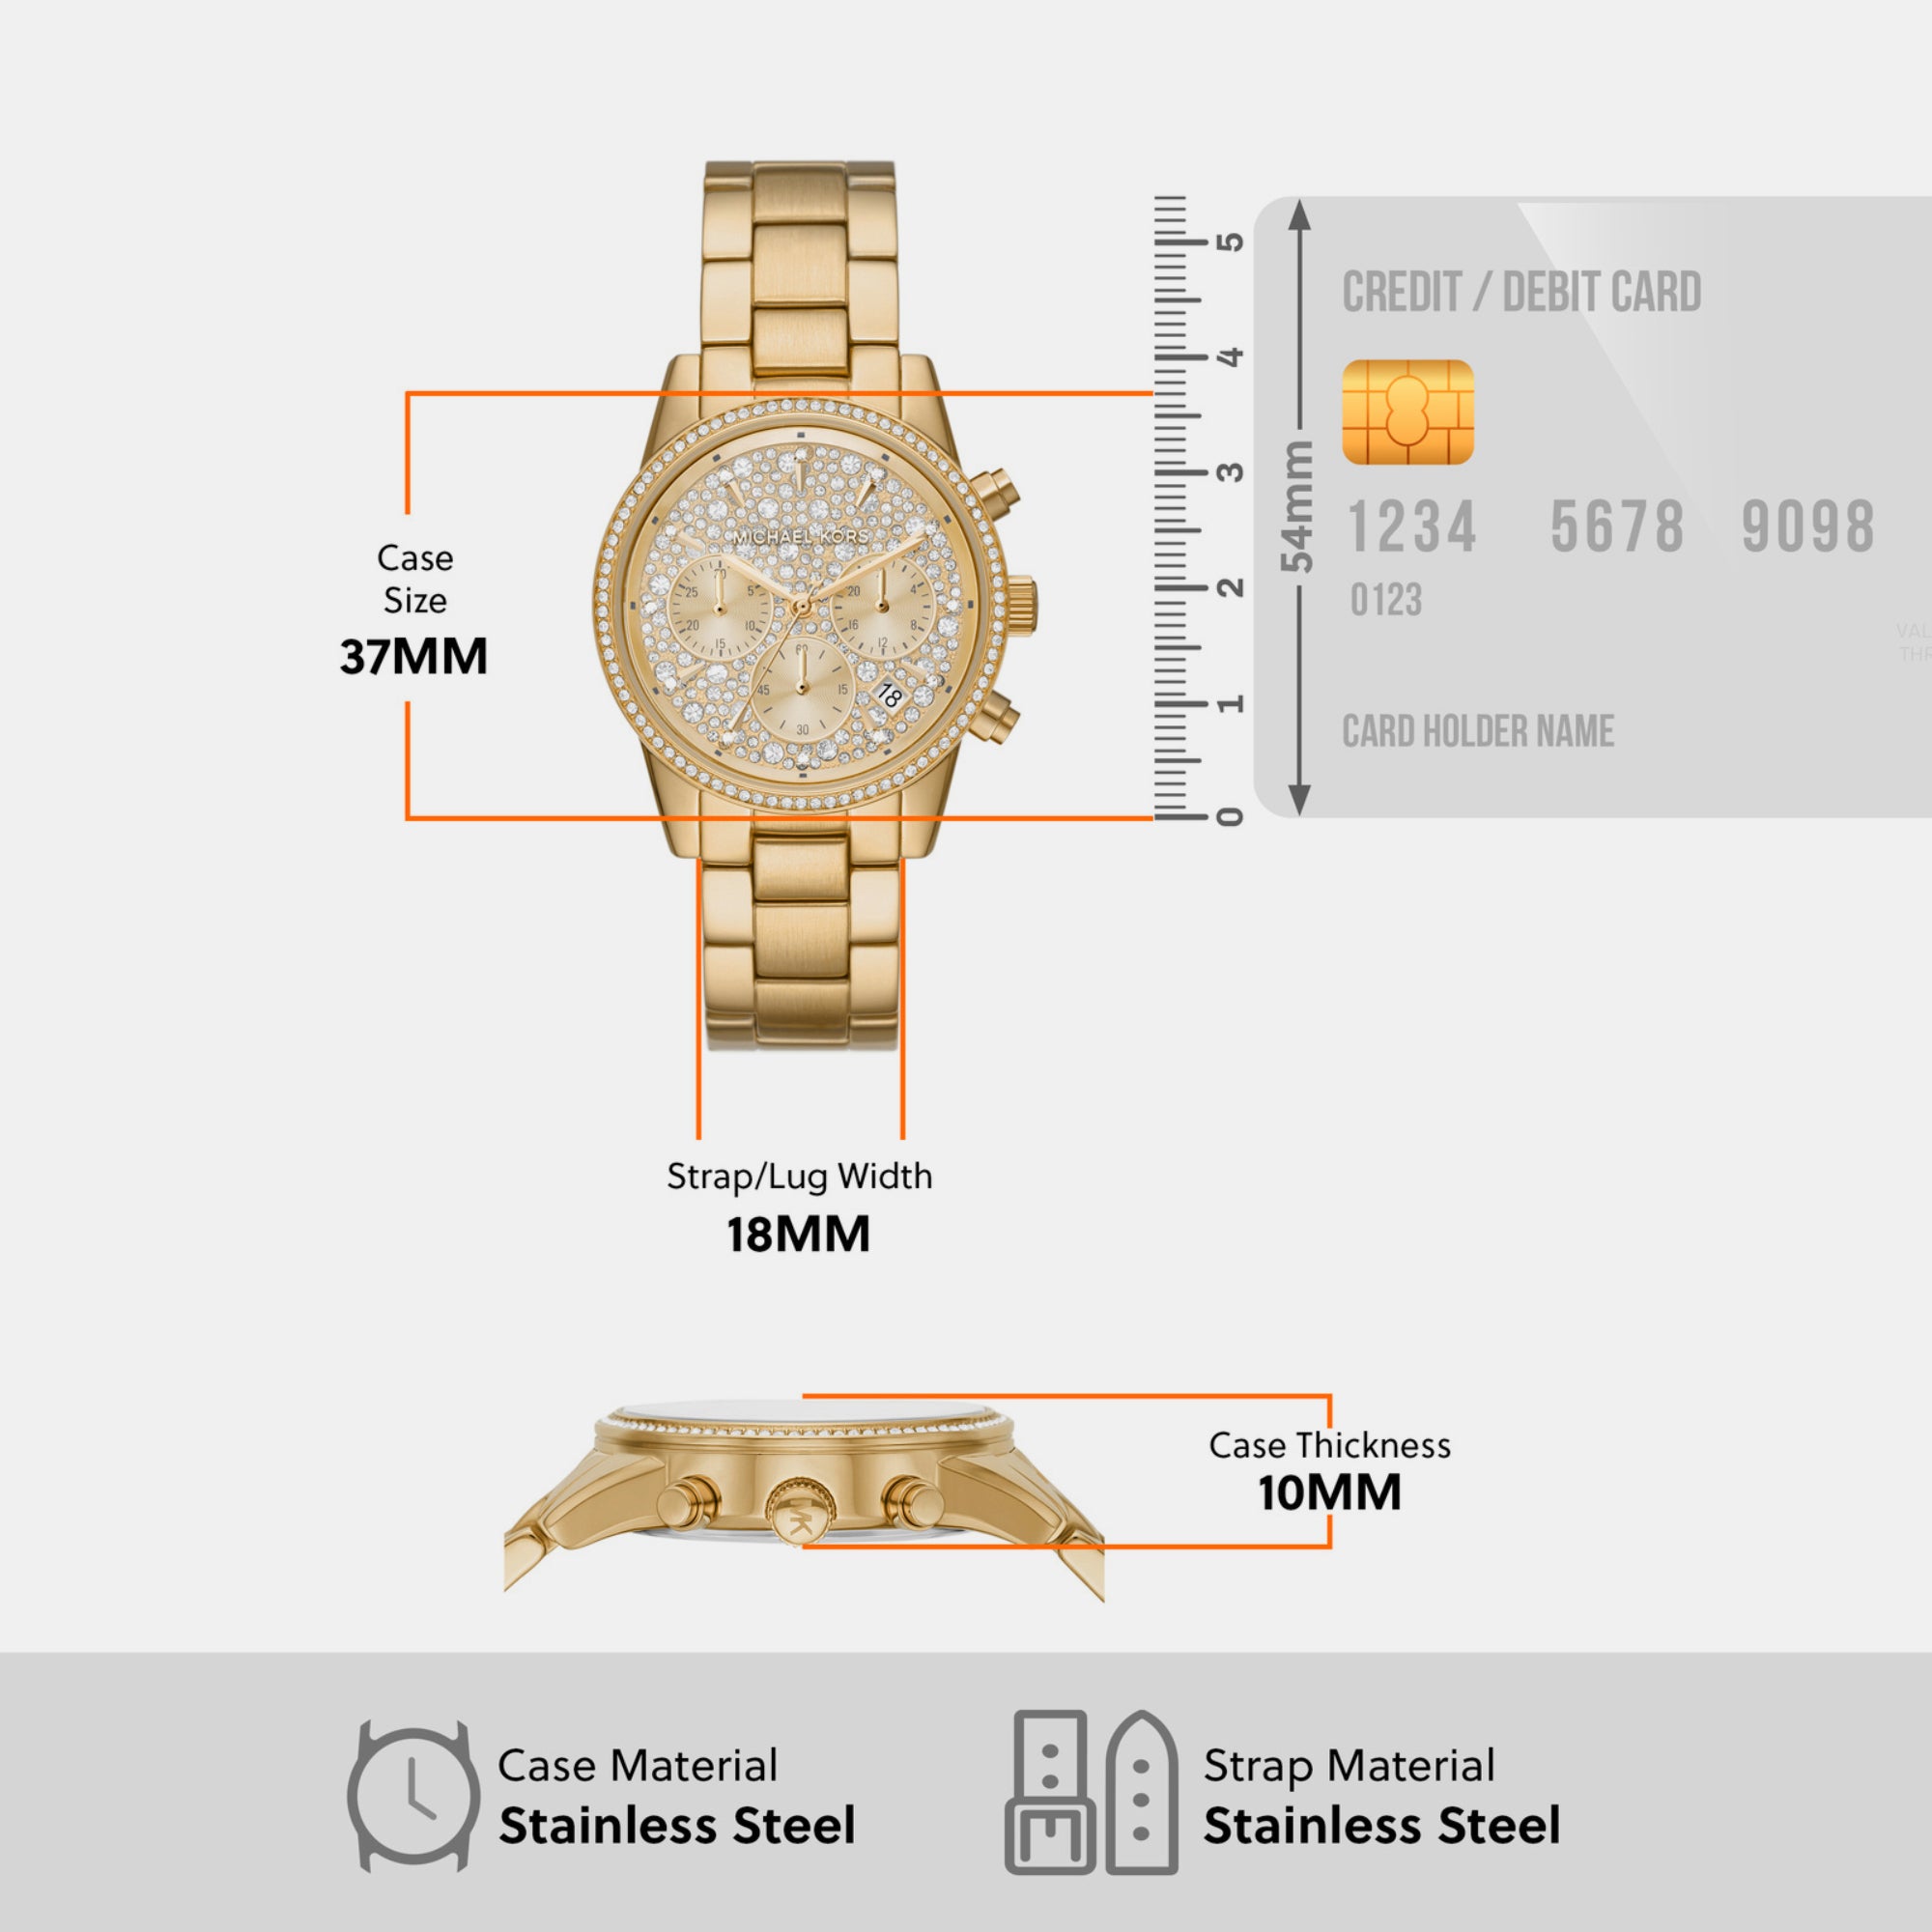 Female Gold Chronograph Stainless Steel Watch MK7310 – Just In Time